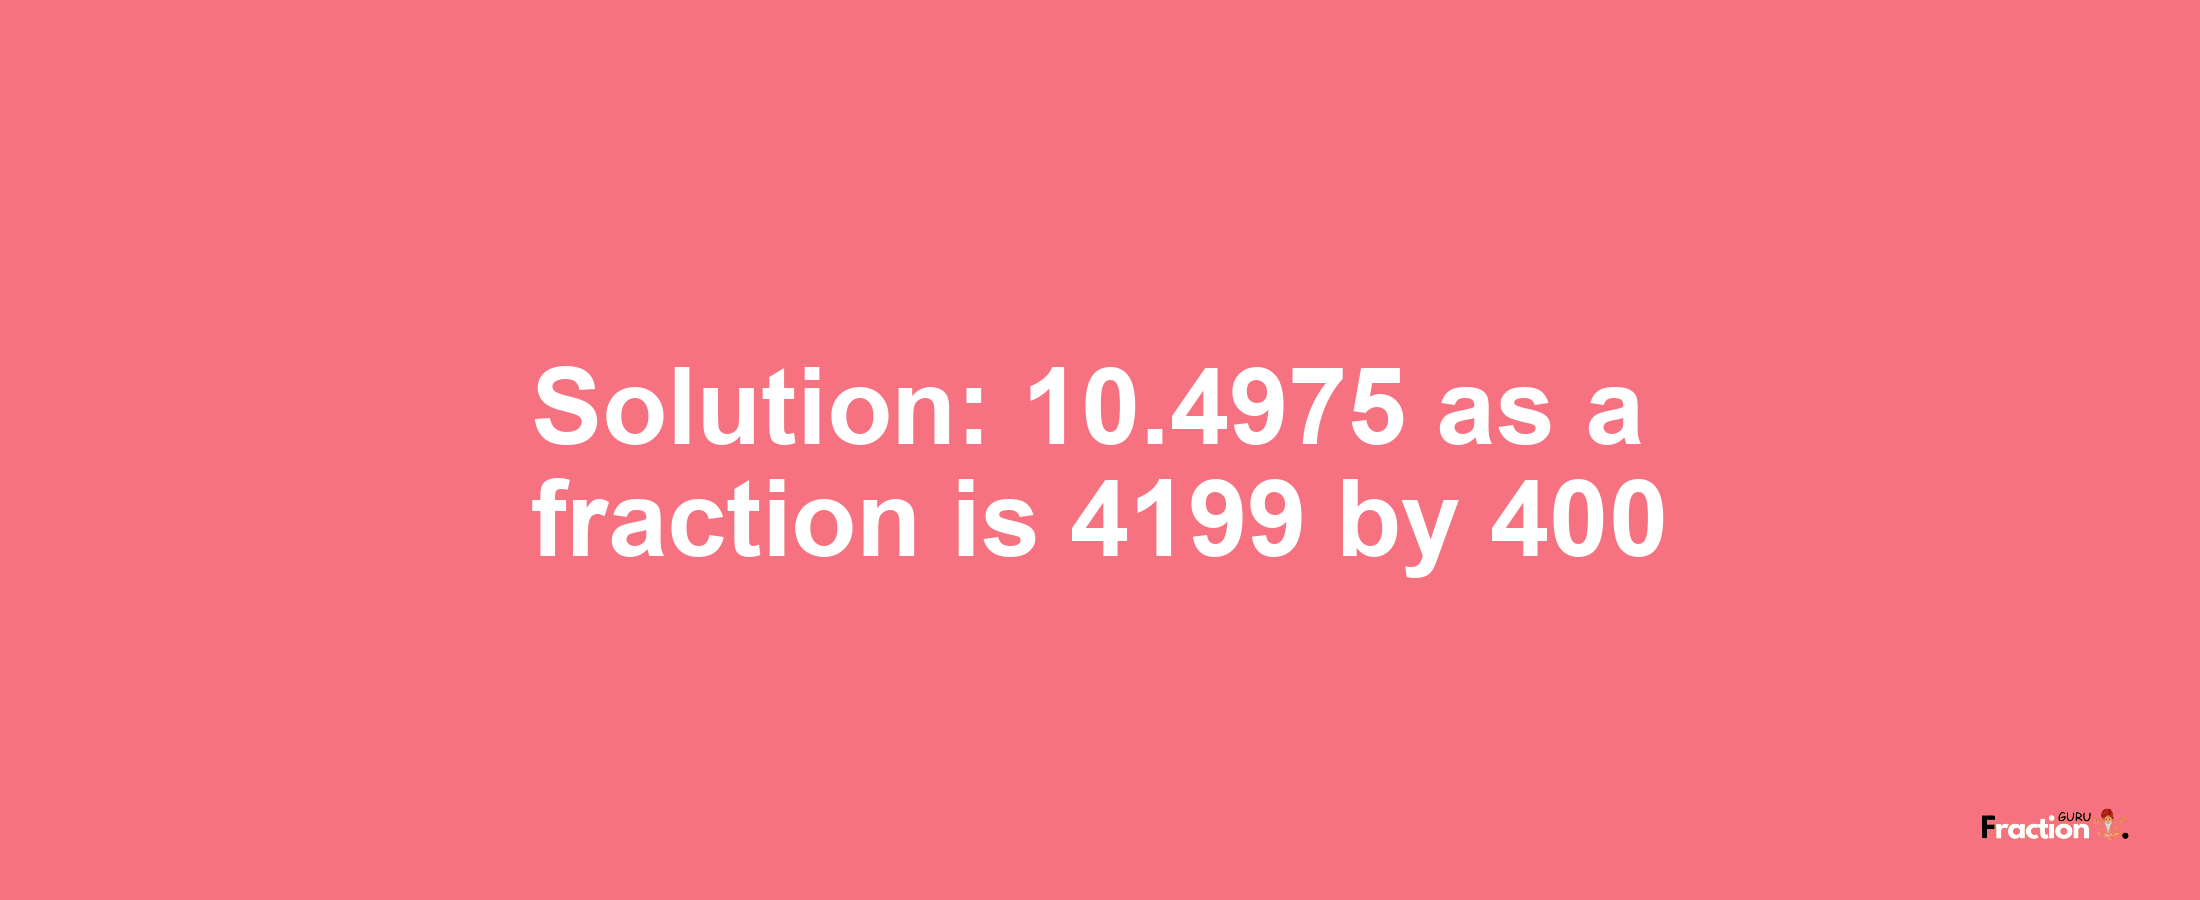 Solution:10.4975 as a fraction is 4199/400